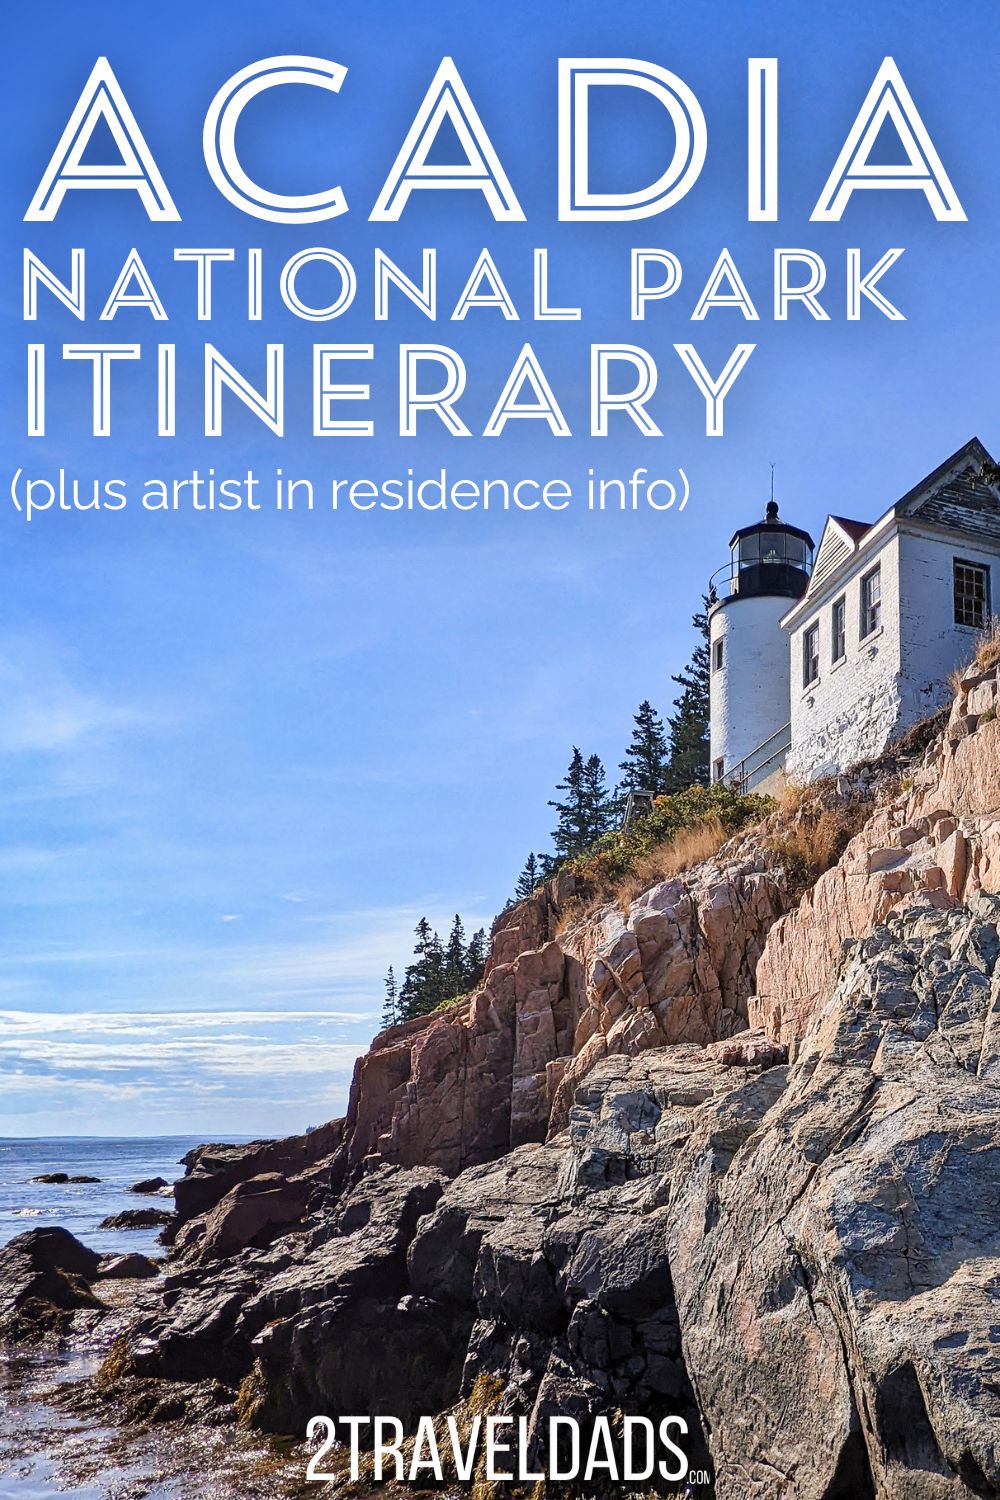 This is the Acadia National Park itinerary you need for visiting both the must see sights and the overlooked things to do in the park. This beautiful destination is different in every season, and there's even seasonal Artist in Residency programs to make Acadia NP even more interesting.